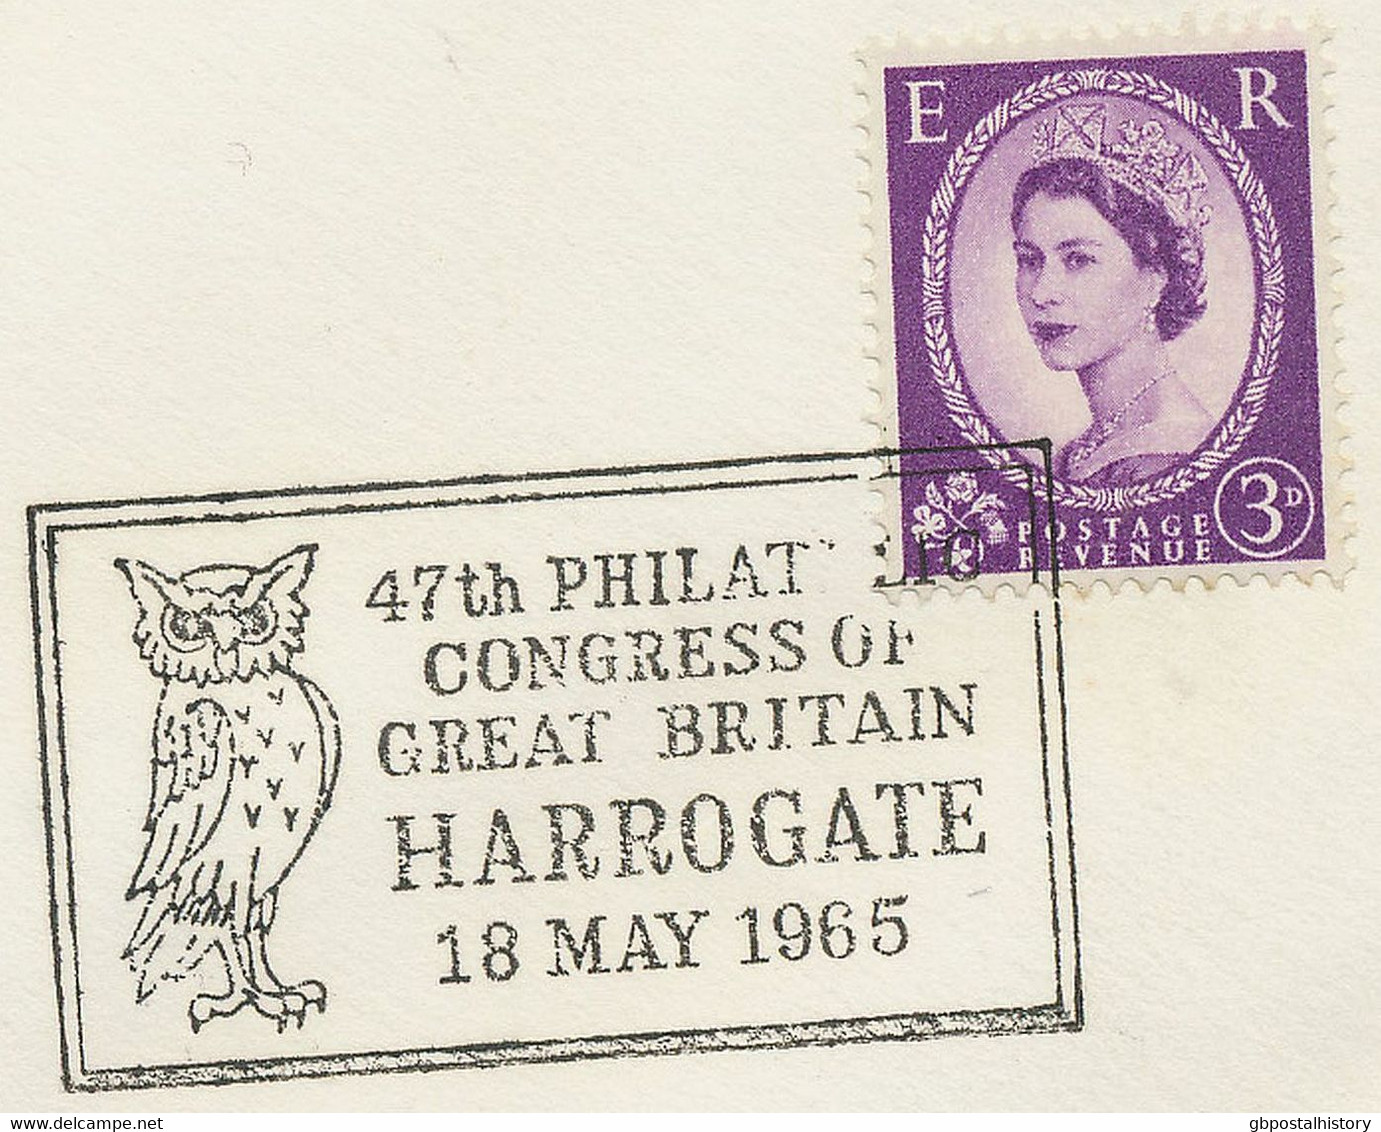 GB SPECIAL EVENT POSTMARK 1965 46TH PHILATELIC CONGRESS OF GREAT BRITAIN HARROGATE - Covers & Documents